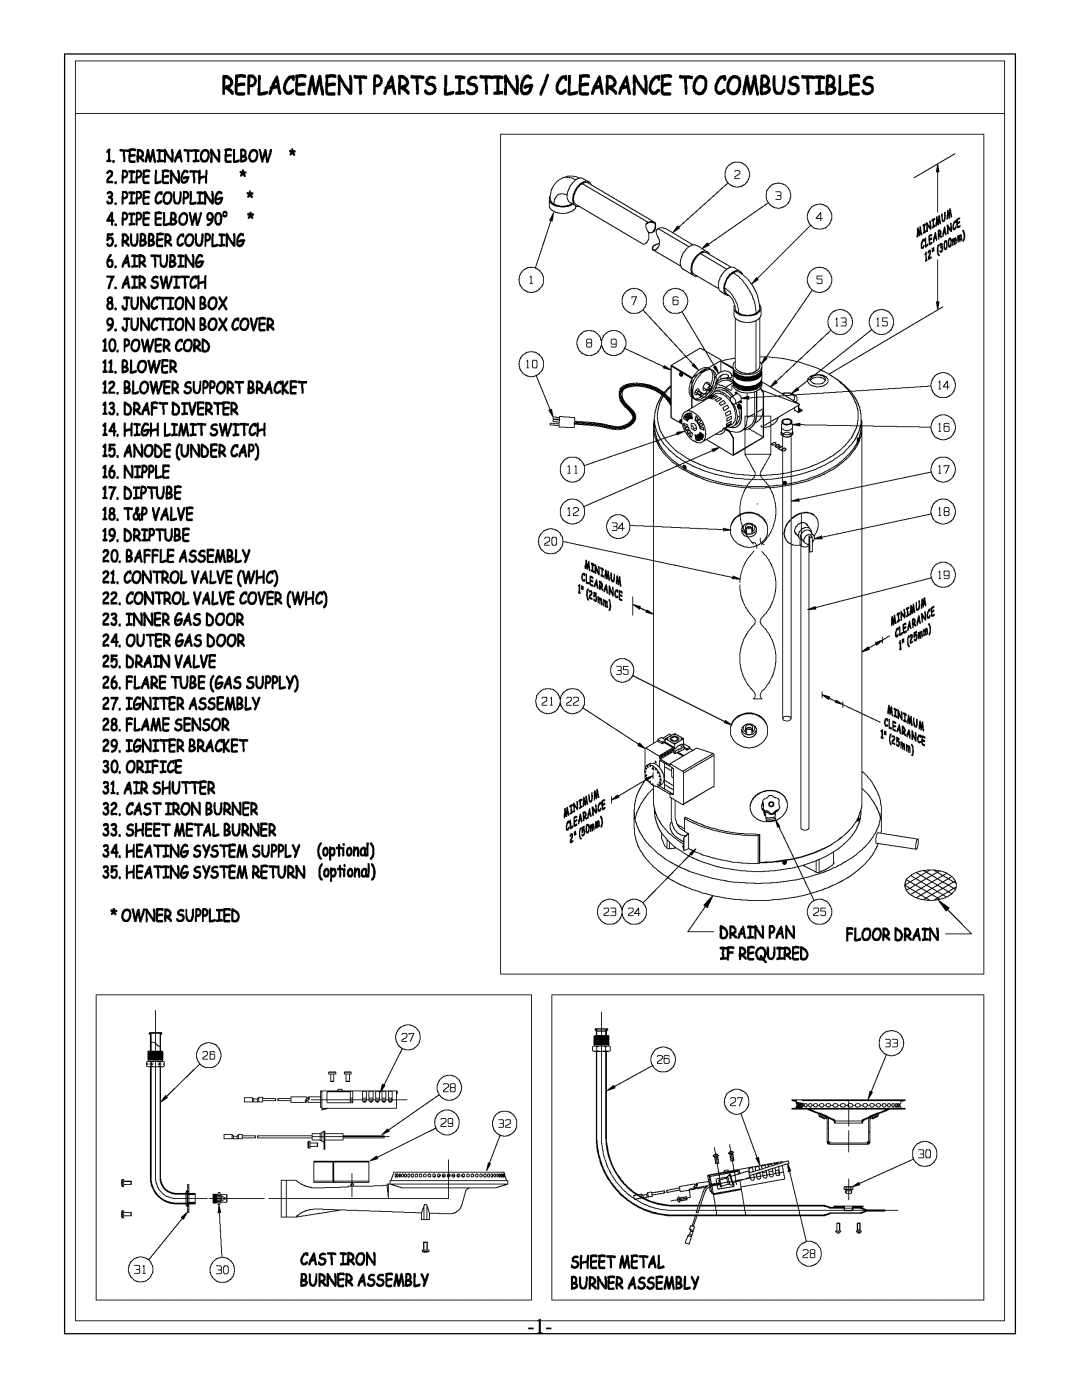 GSW POWER VENTED GAS FIRED WATER HEATER operating instructions 